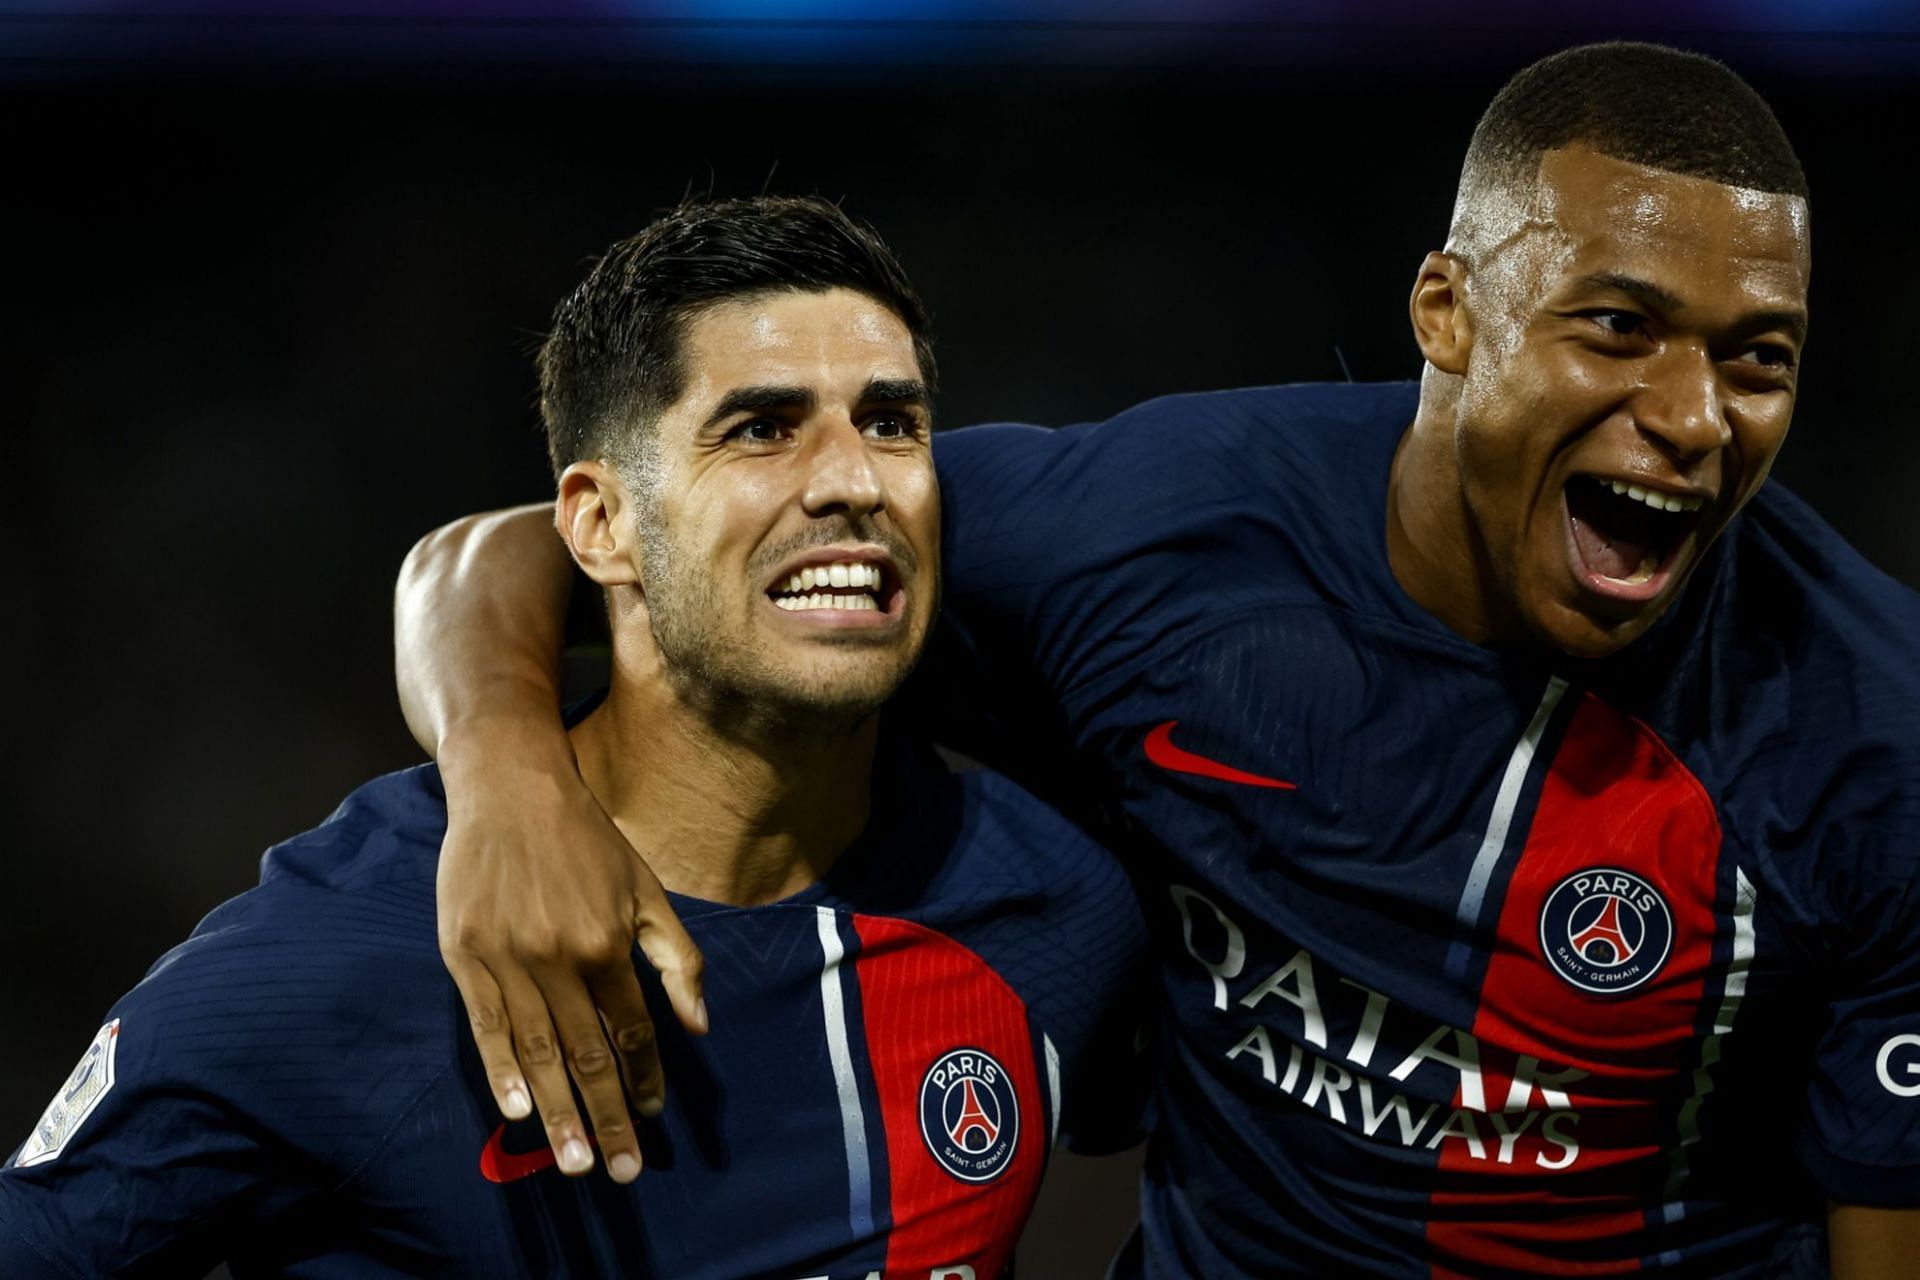 PSG secured a comfortable 3-1 win over RC Lens in Ligue 1.